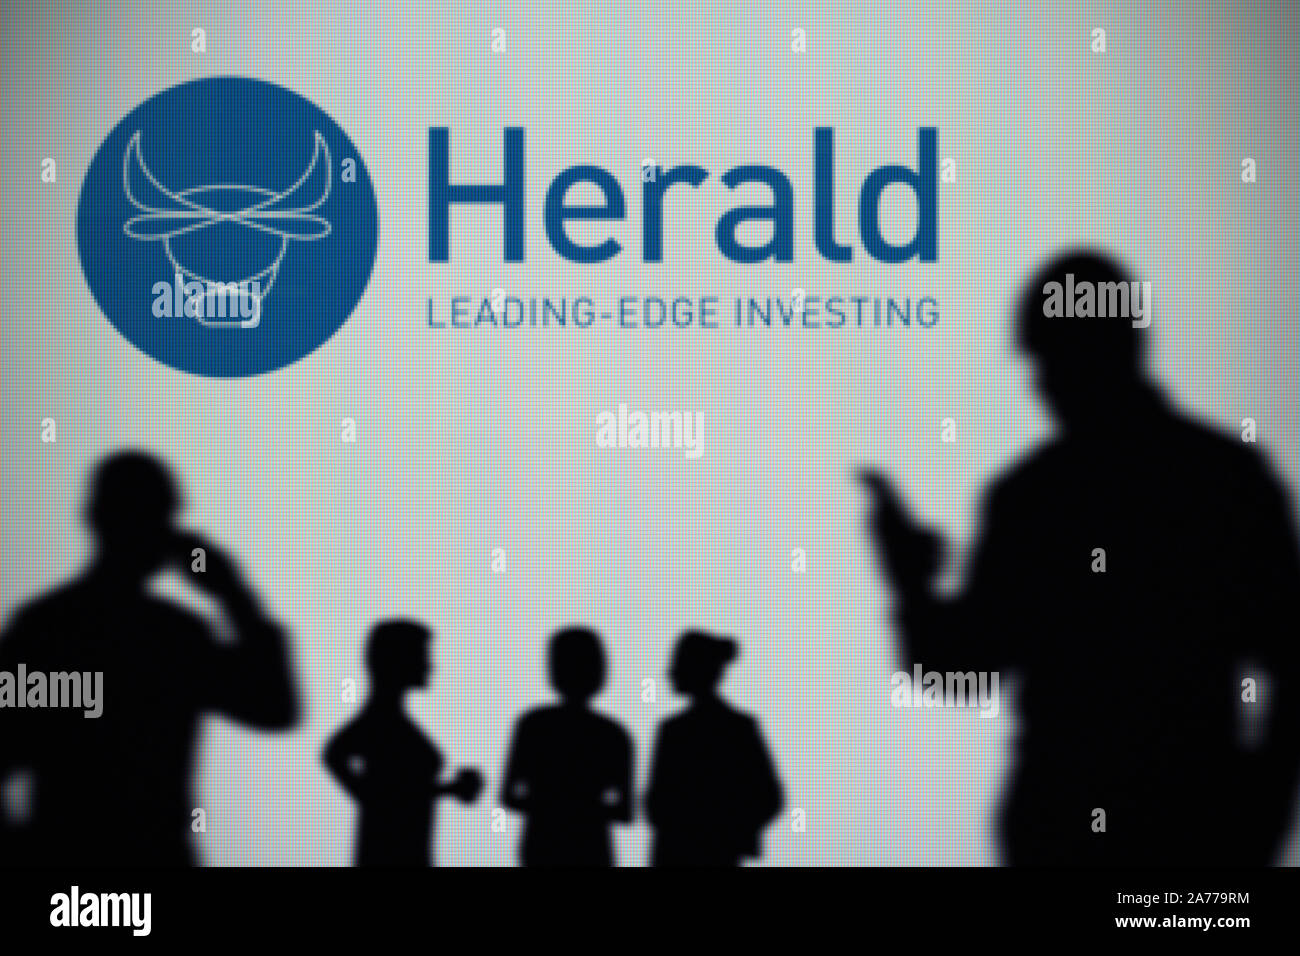 The Herald Investment Trust logo is seen on an LED screen in the background while a silhouetted person uses a smartphone (Editorial use only) Stock Photo